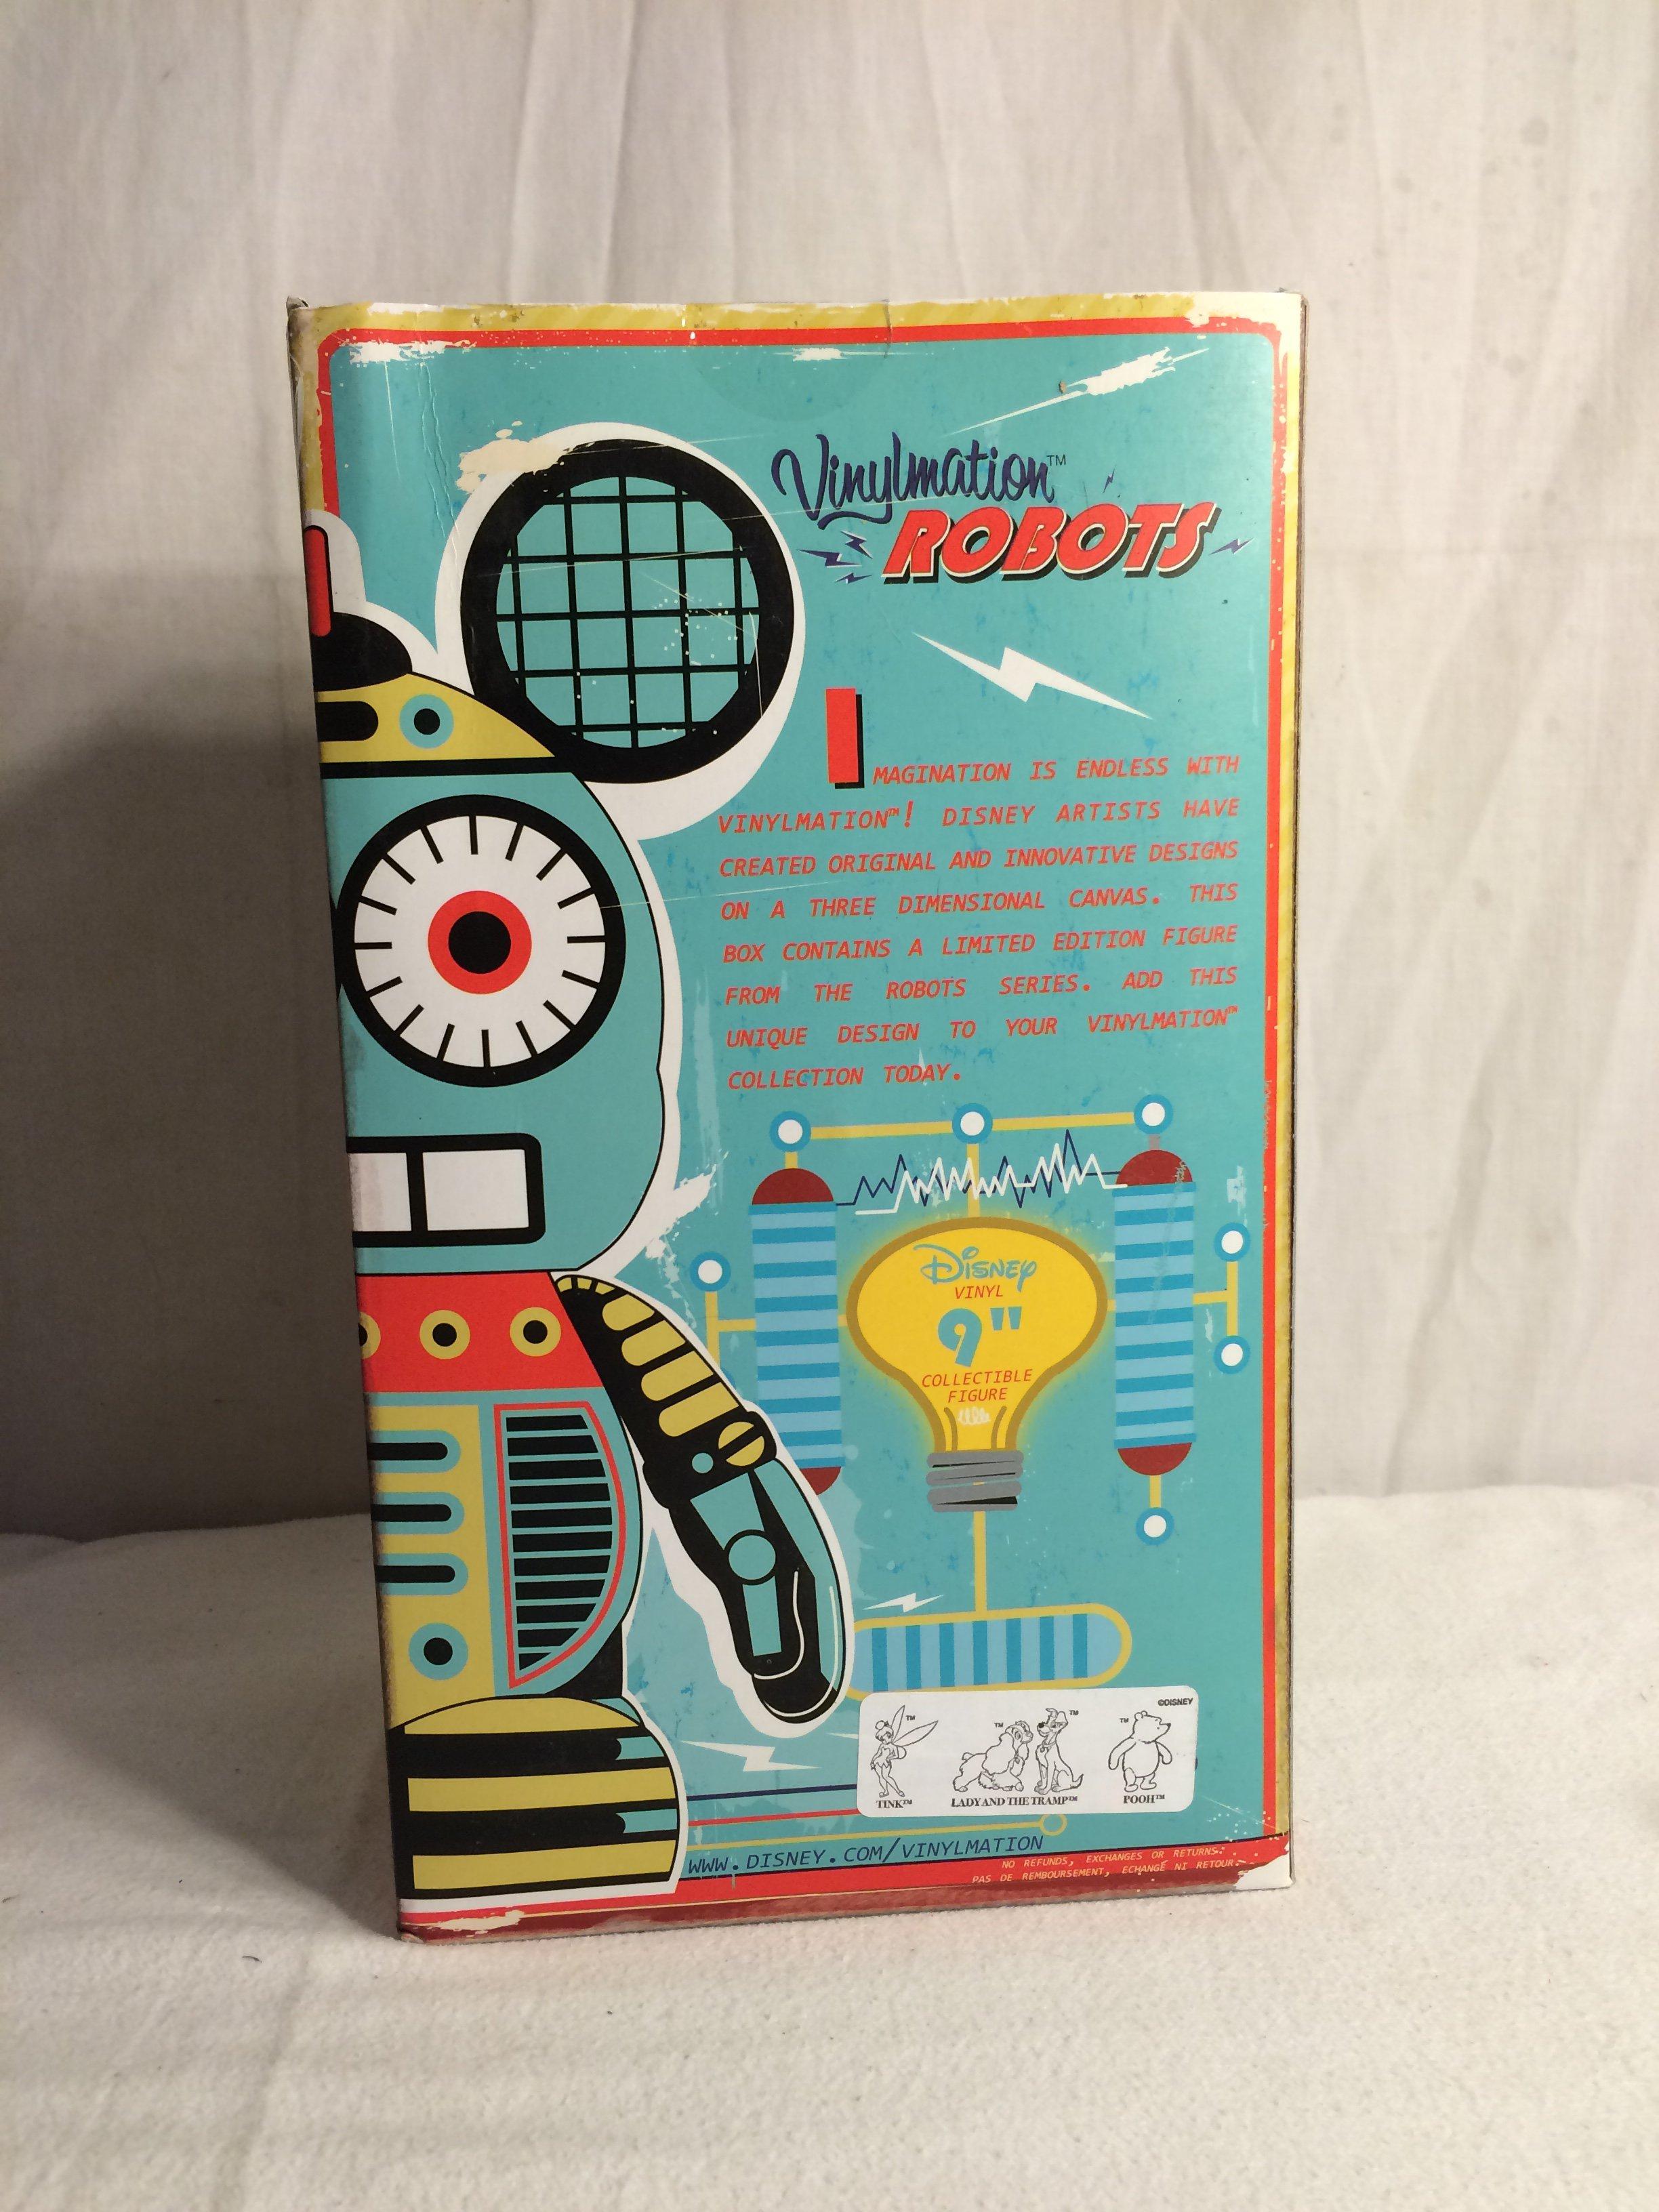 Collector Disney Vinylmation Robots Limited Edition Of 600 6.5"W by 11.5" Tall Box Size